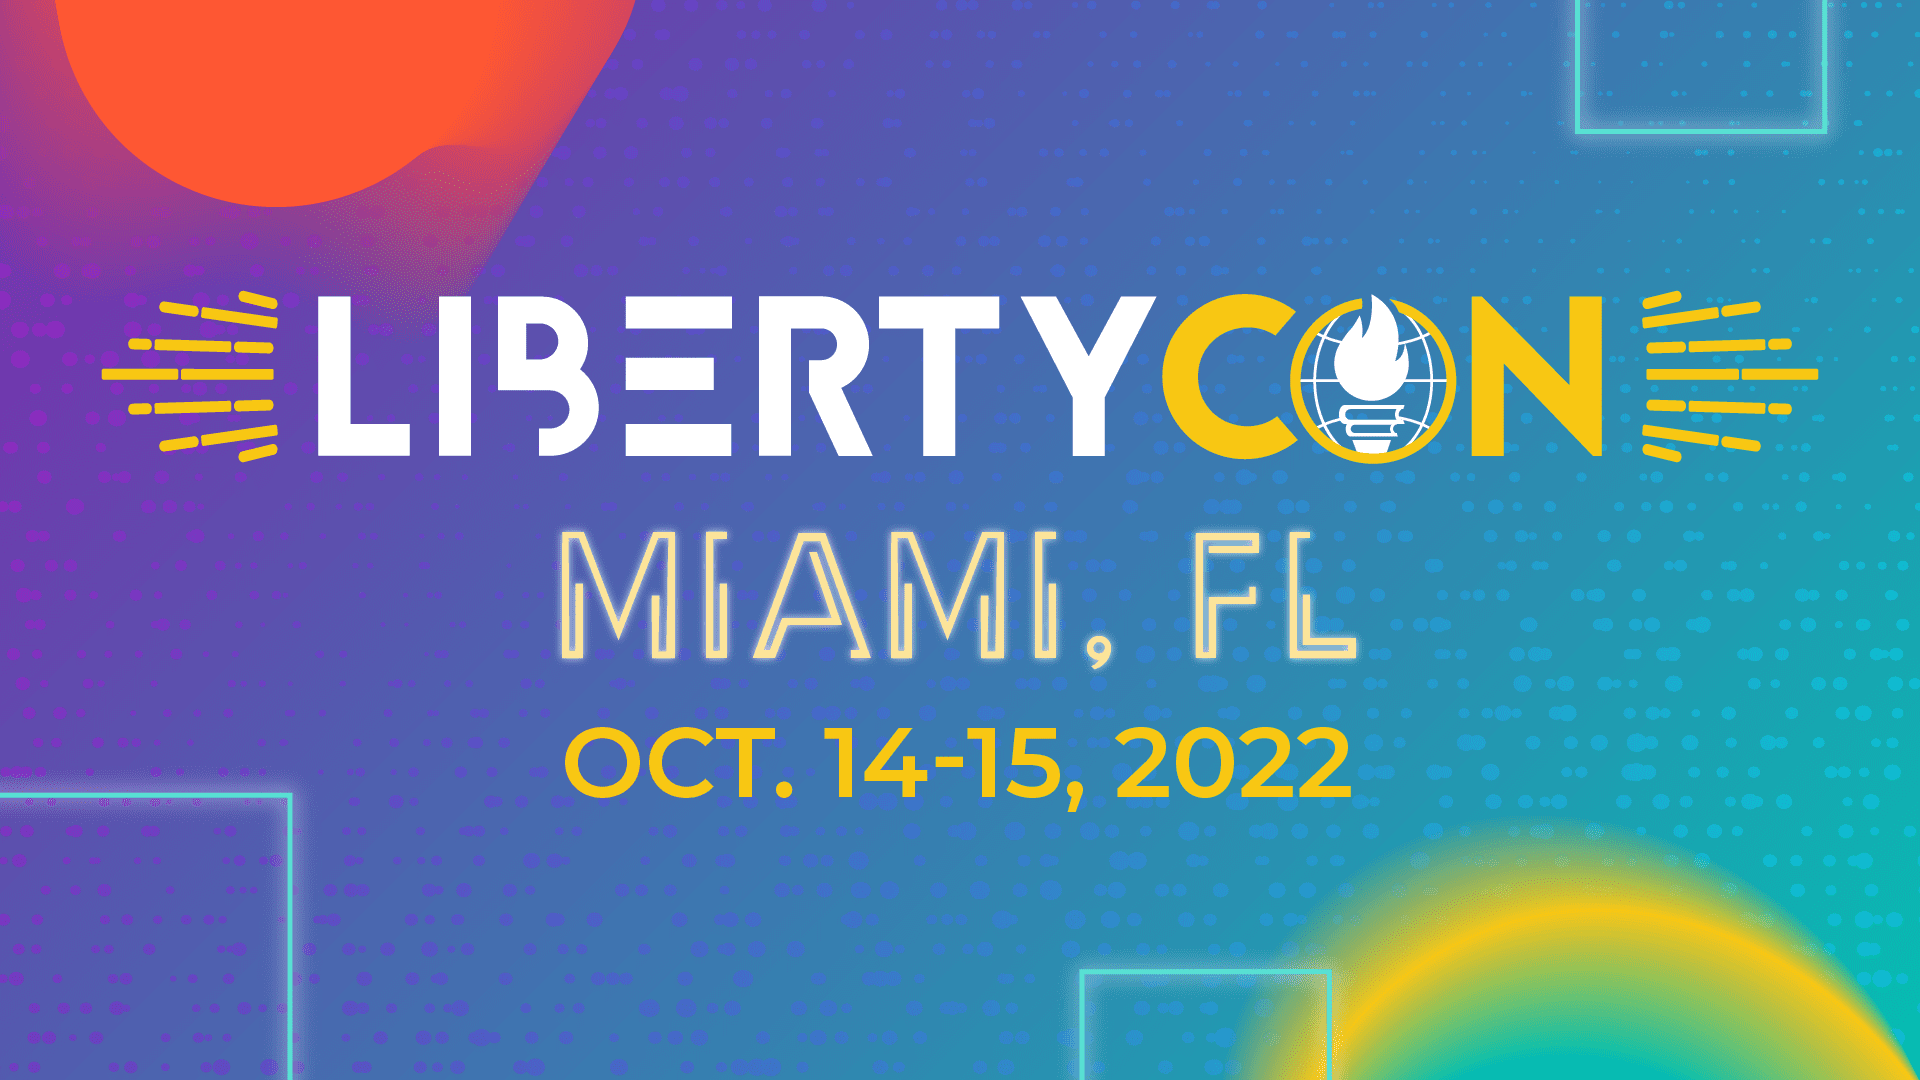 Students For Liberty, the world’s largest international pro-liberty student organization, announces the return of their flagship event, LibertyCon International